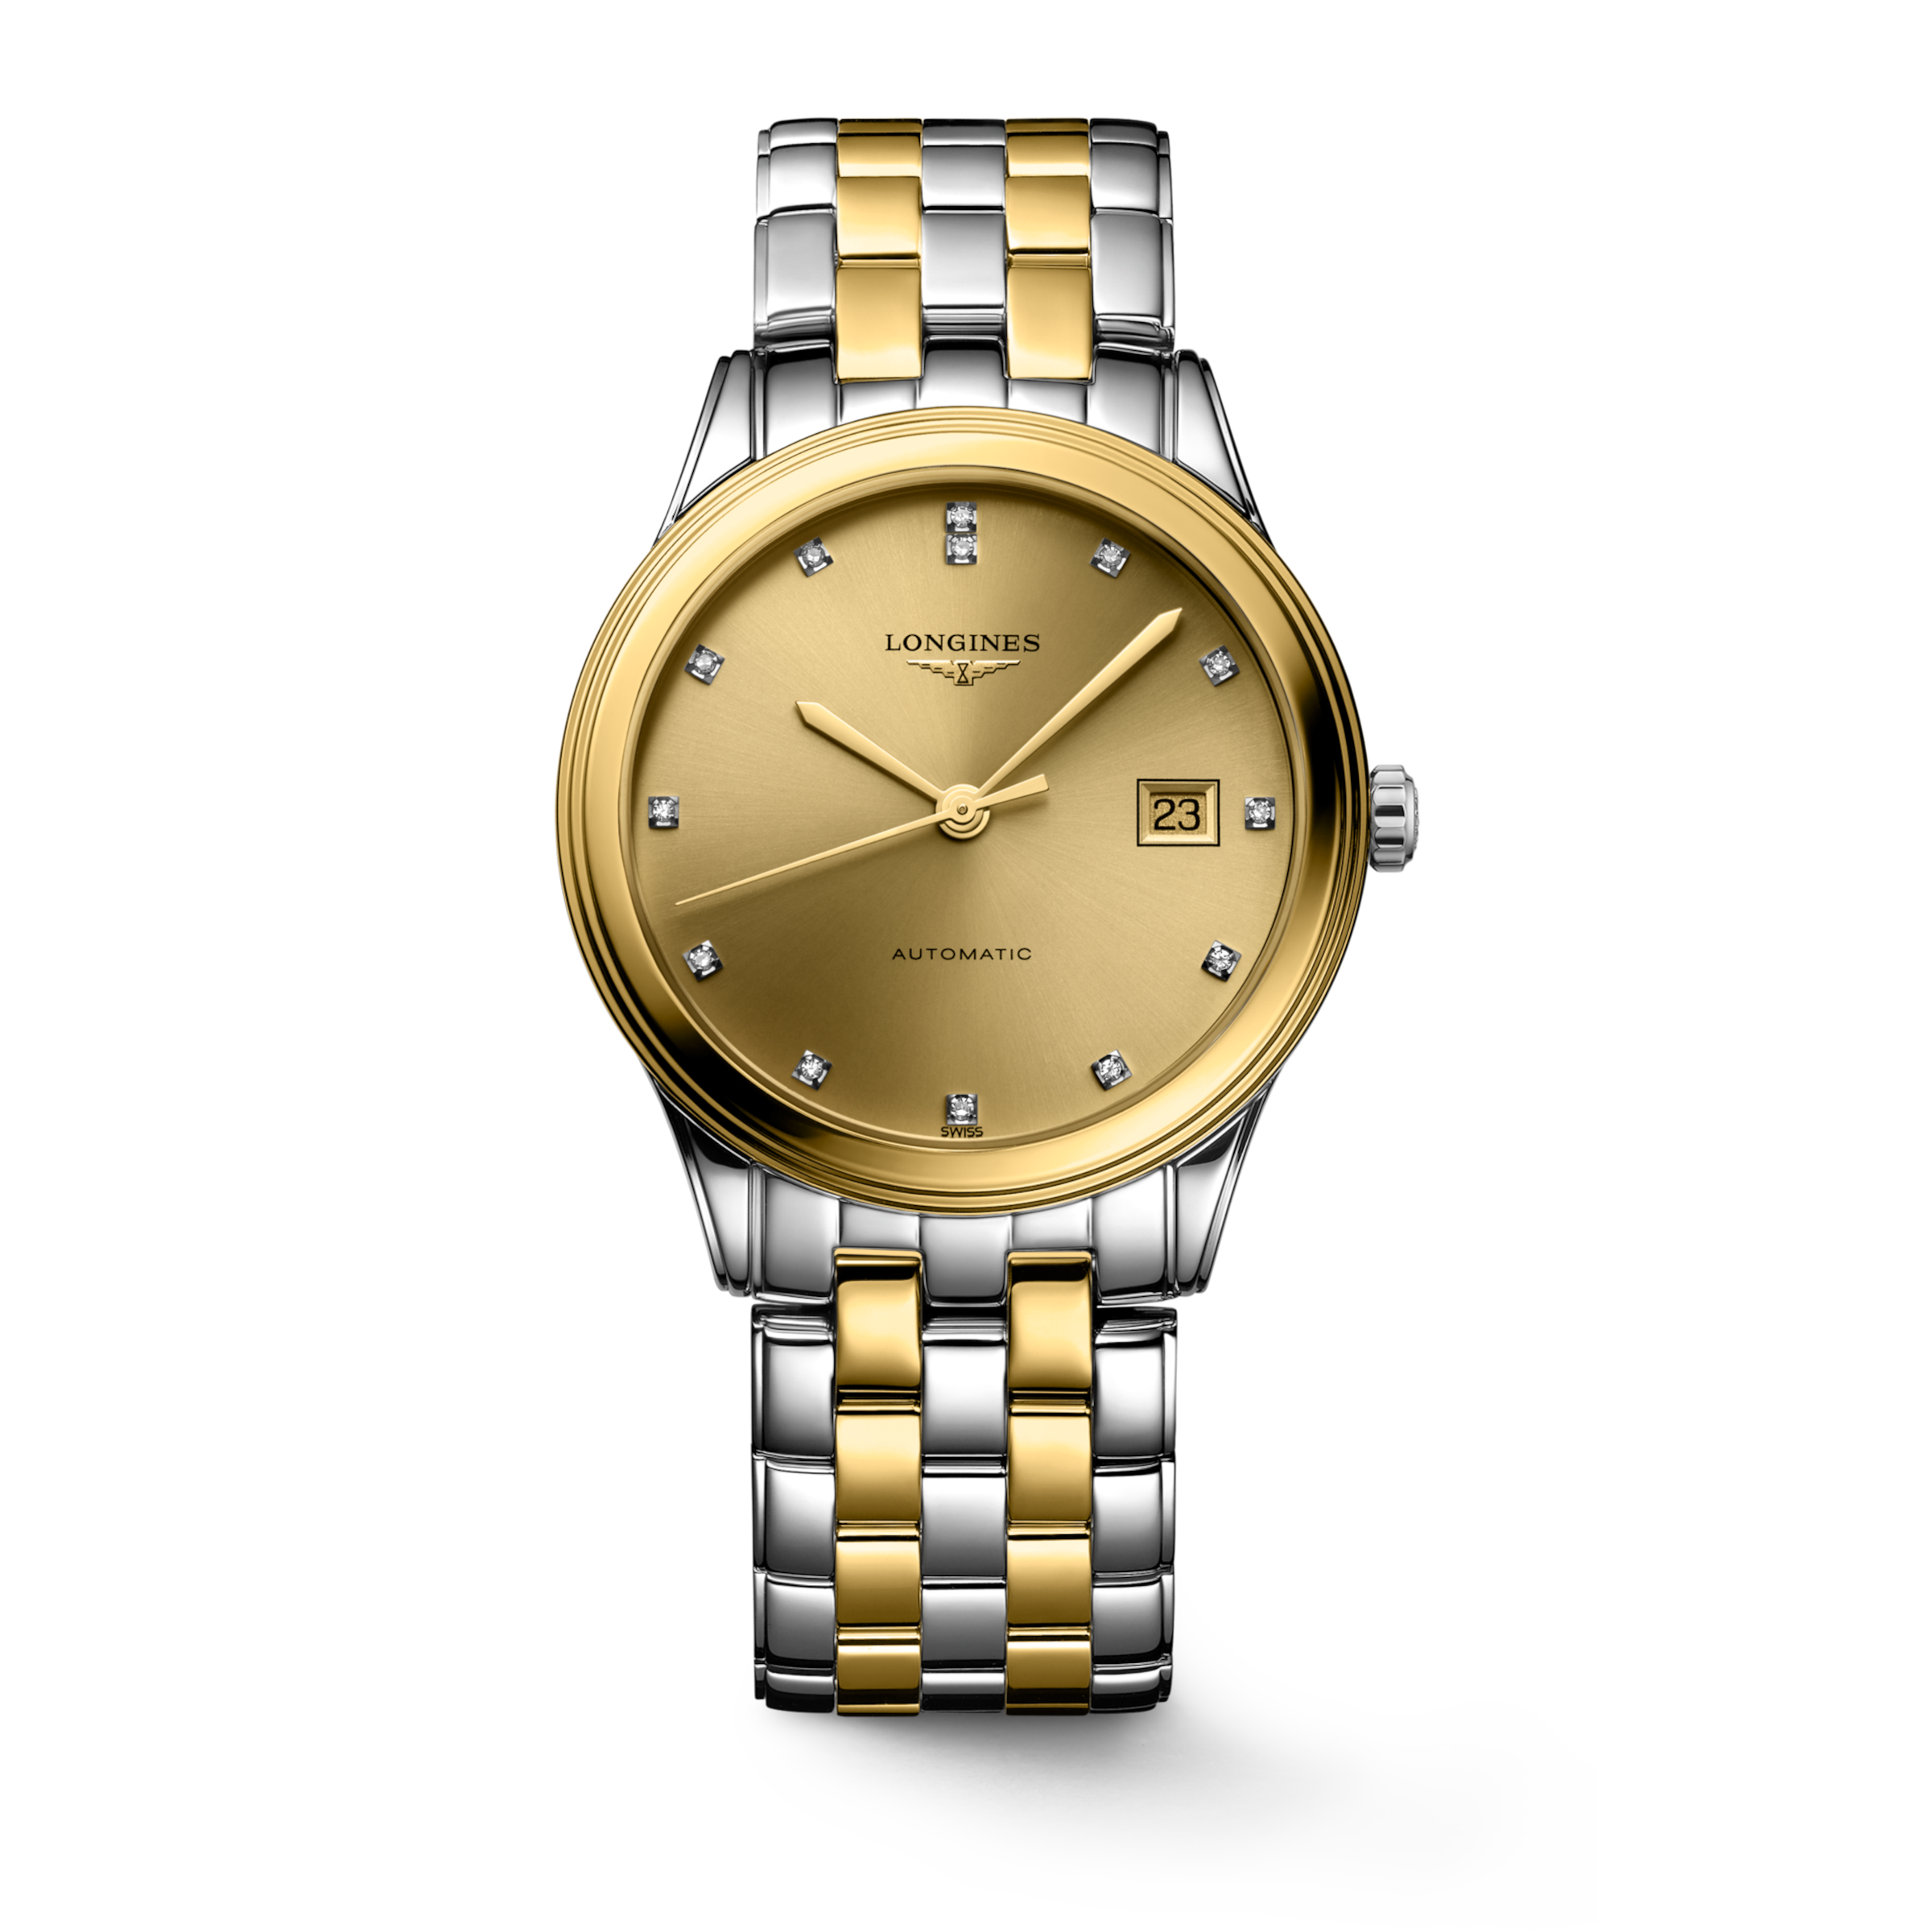 Longines FLAGSHIP Automatic Stainless steel and yellow PVD coating Watch - L4.974.3.37.7